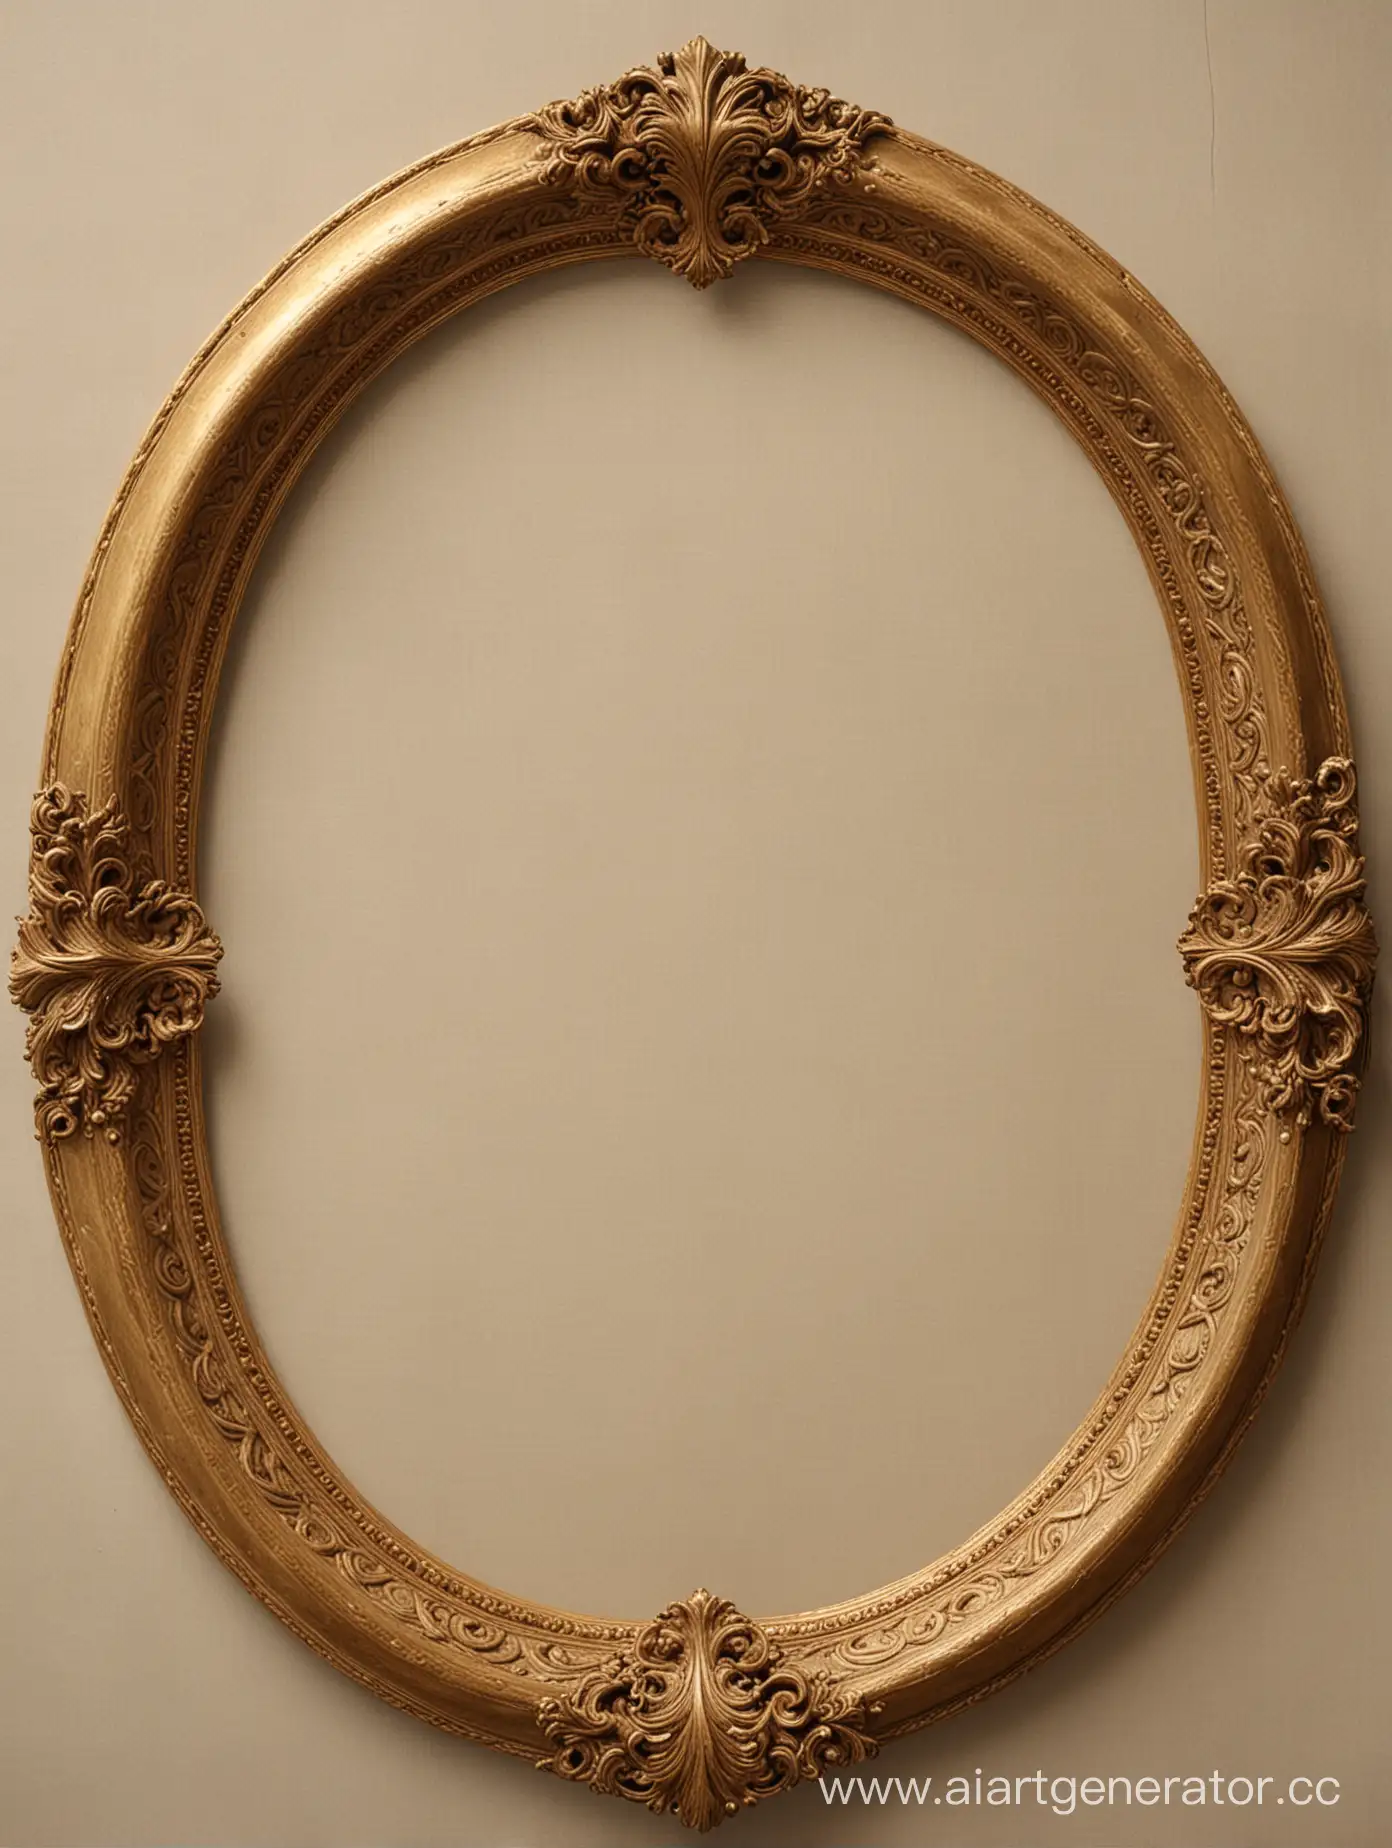 Medieval-Knight-and-Lady-in-an-Ornate-Oval-Frame